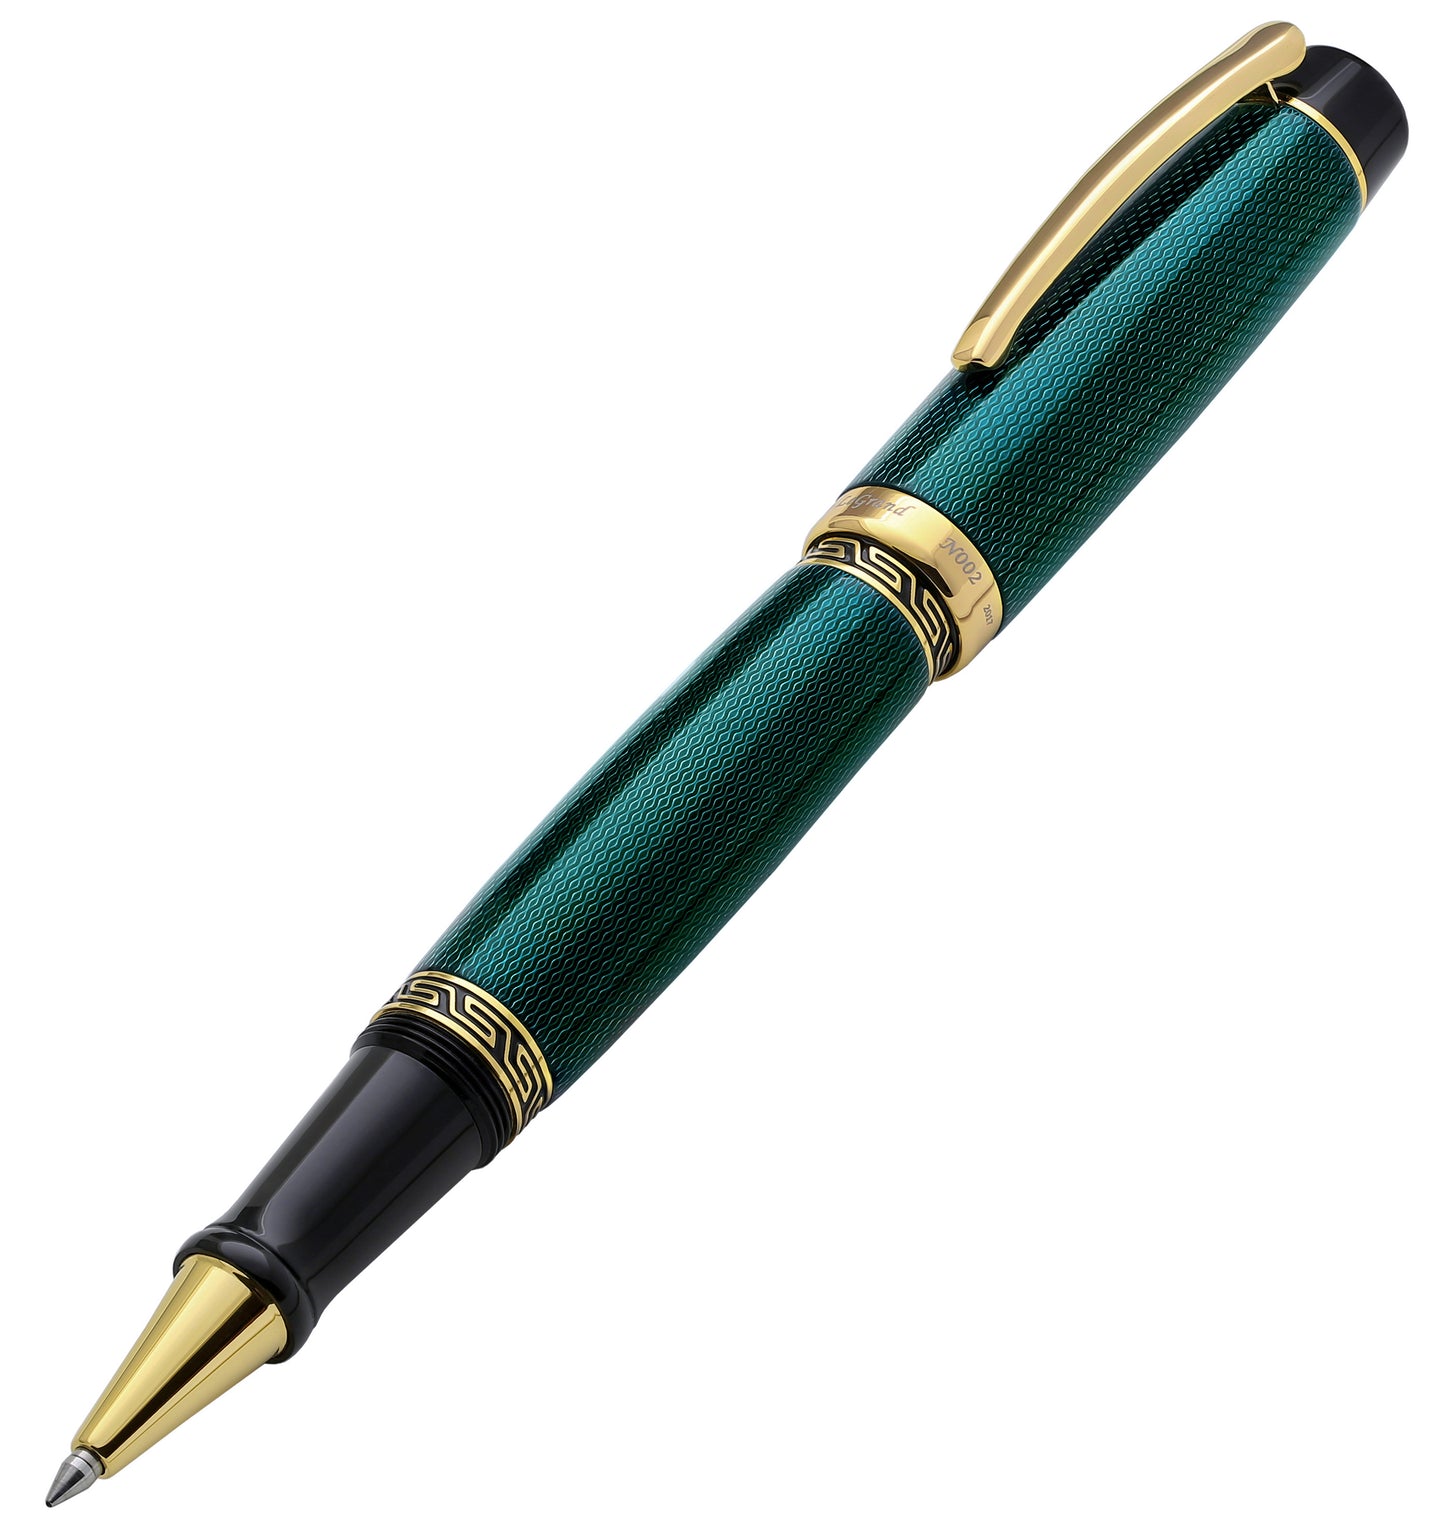 Xezo - Angled view of the front of the Maestro LeGrand Dioptase R rollerball pen